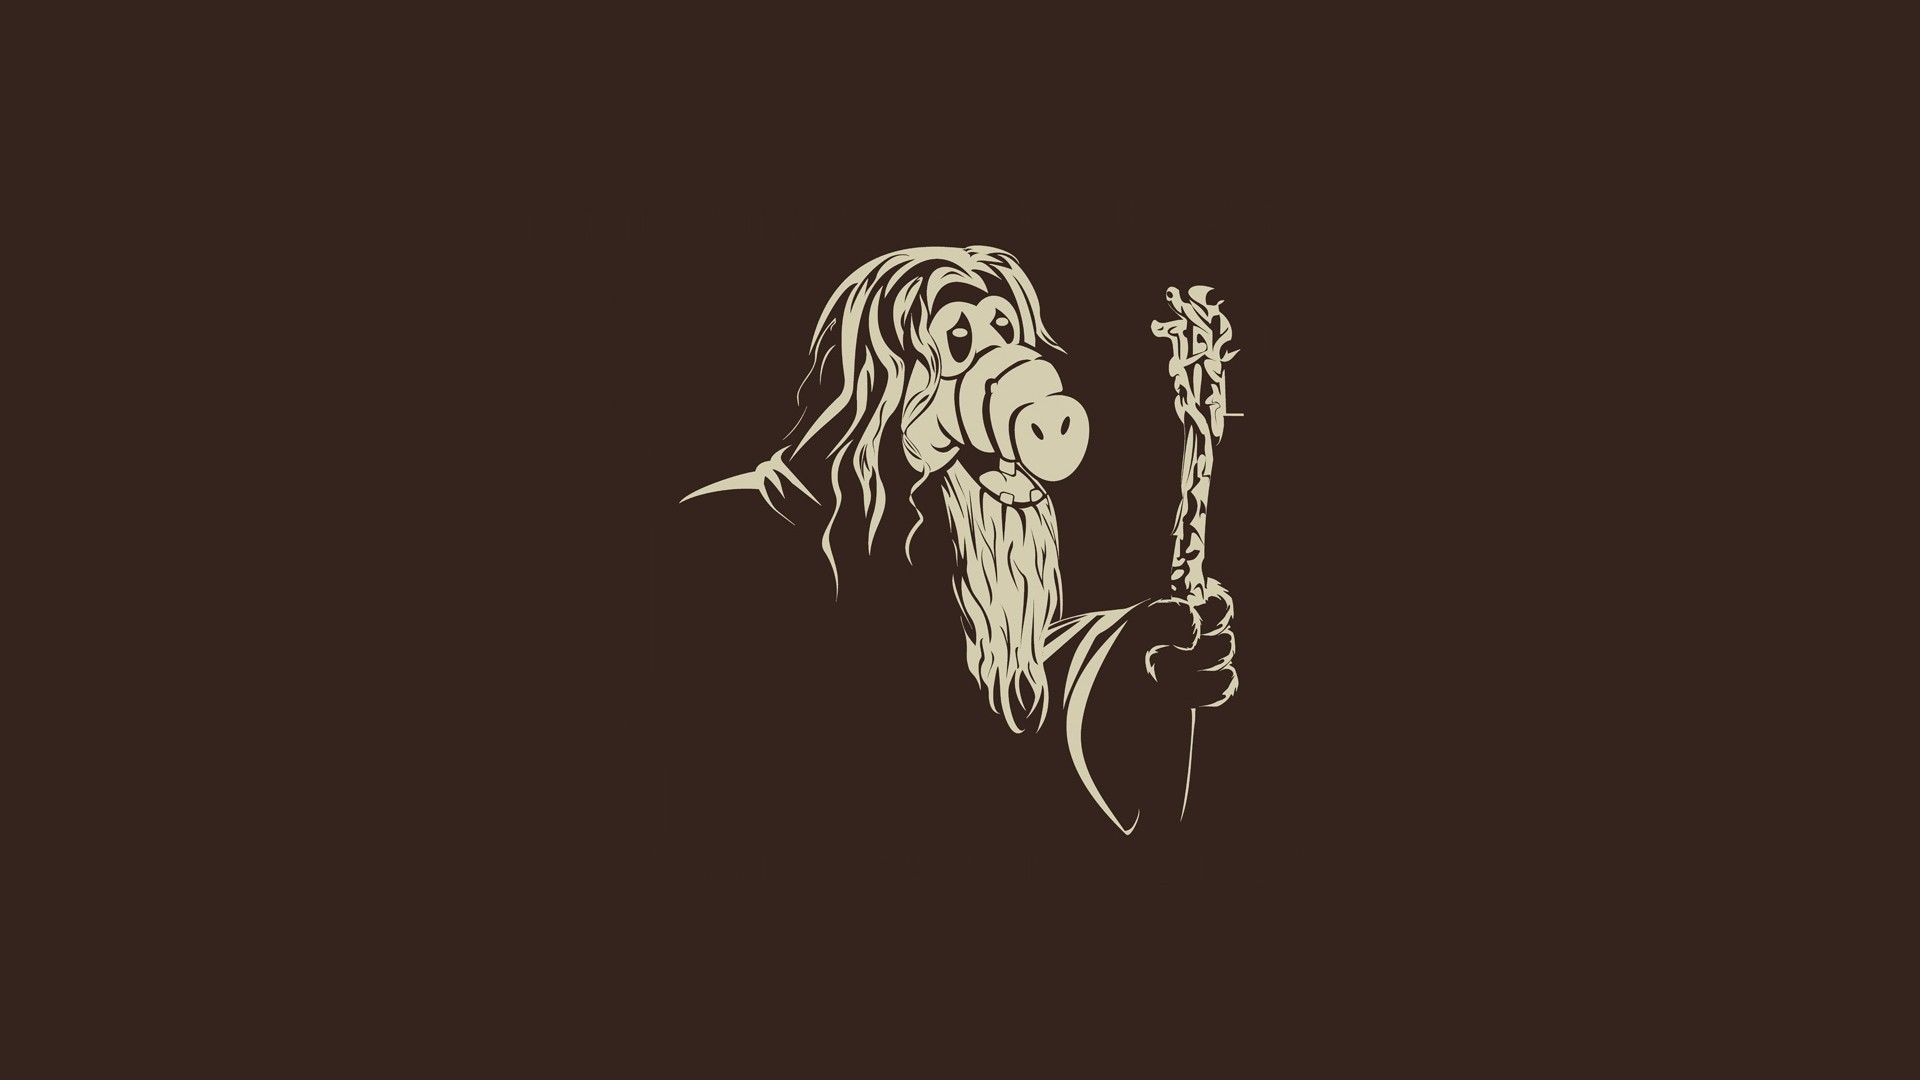 Alf Gandalf The Lord Of The Rings 1920x1080